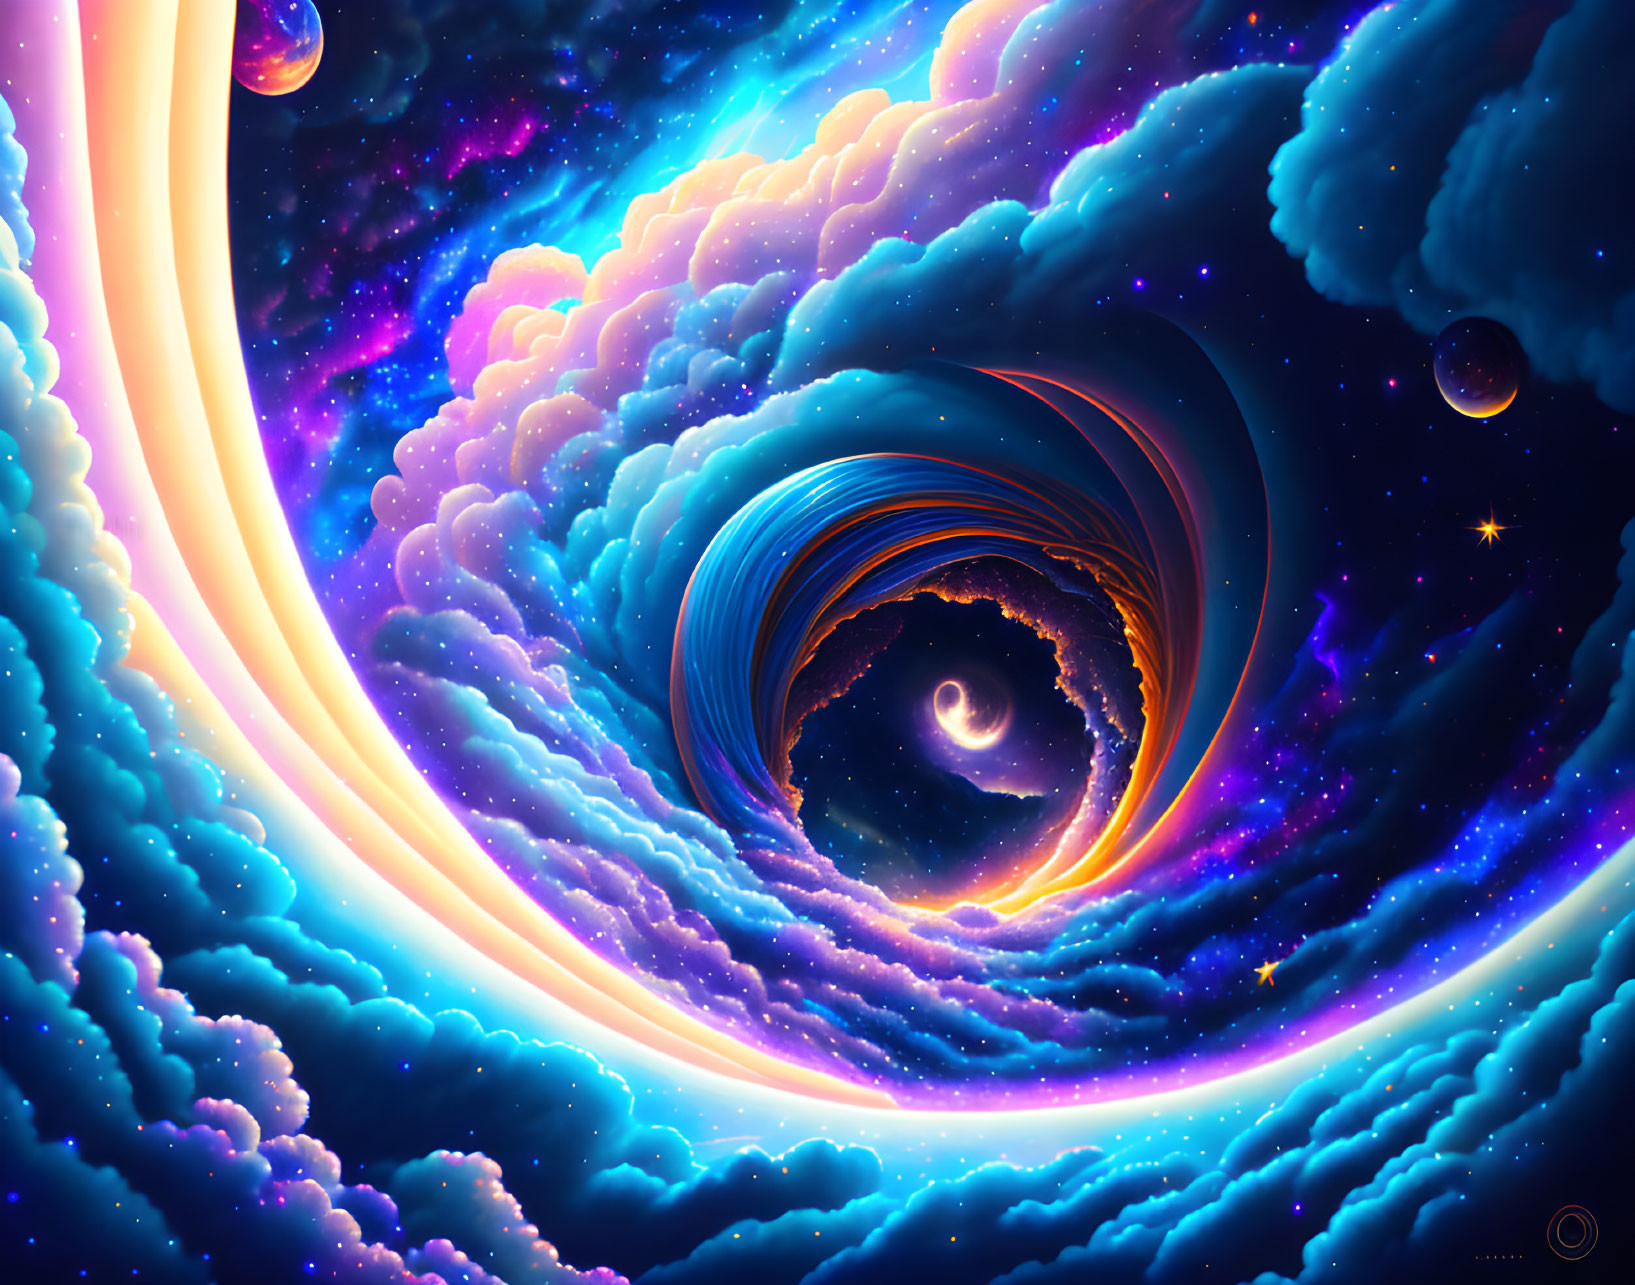 Swirling galaxy in vibrant blues, purples, and orange clouds